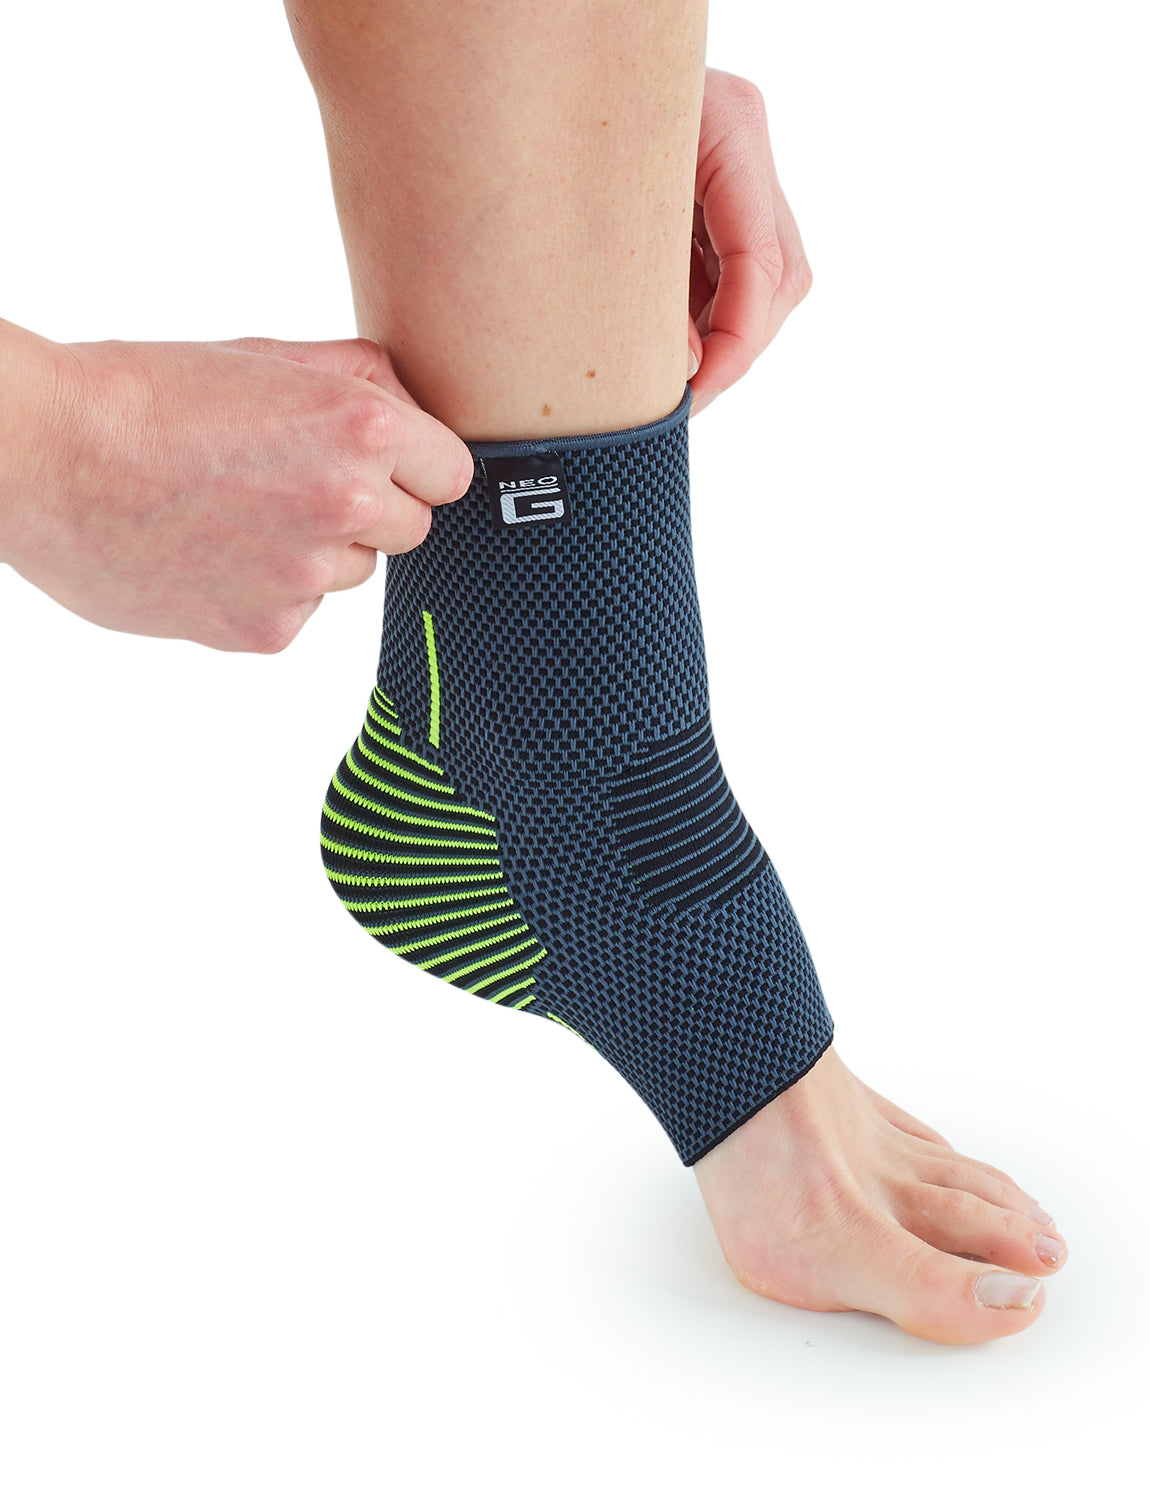 Active Ankle Support